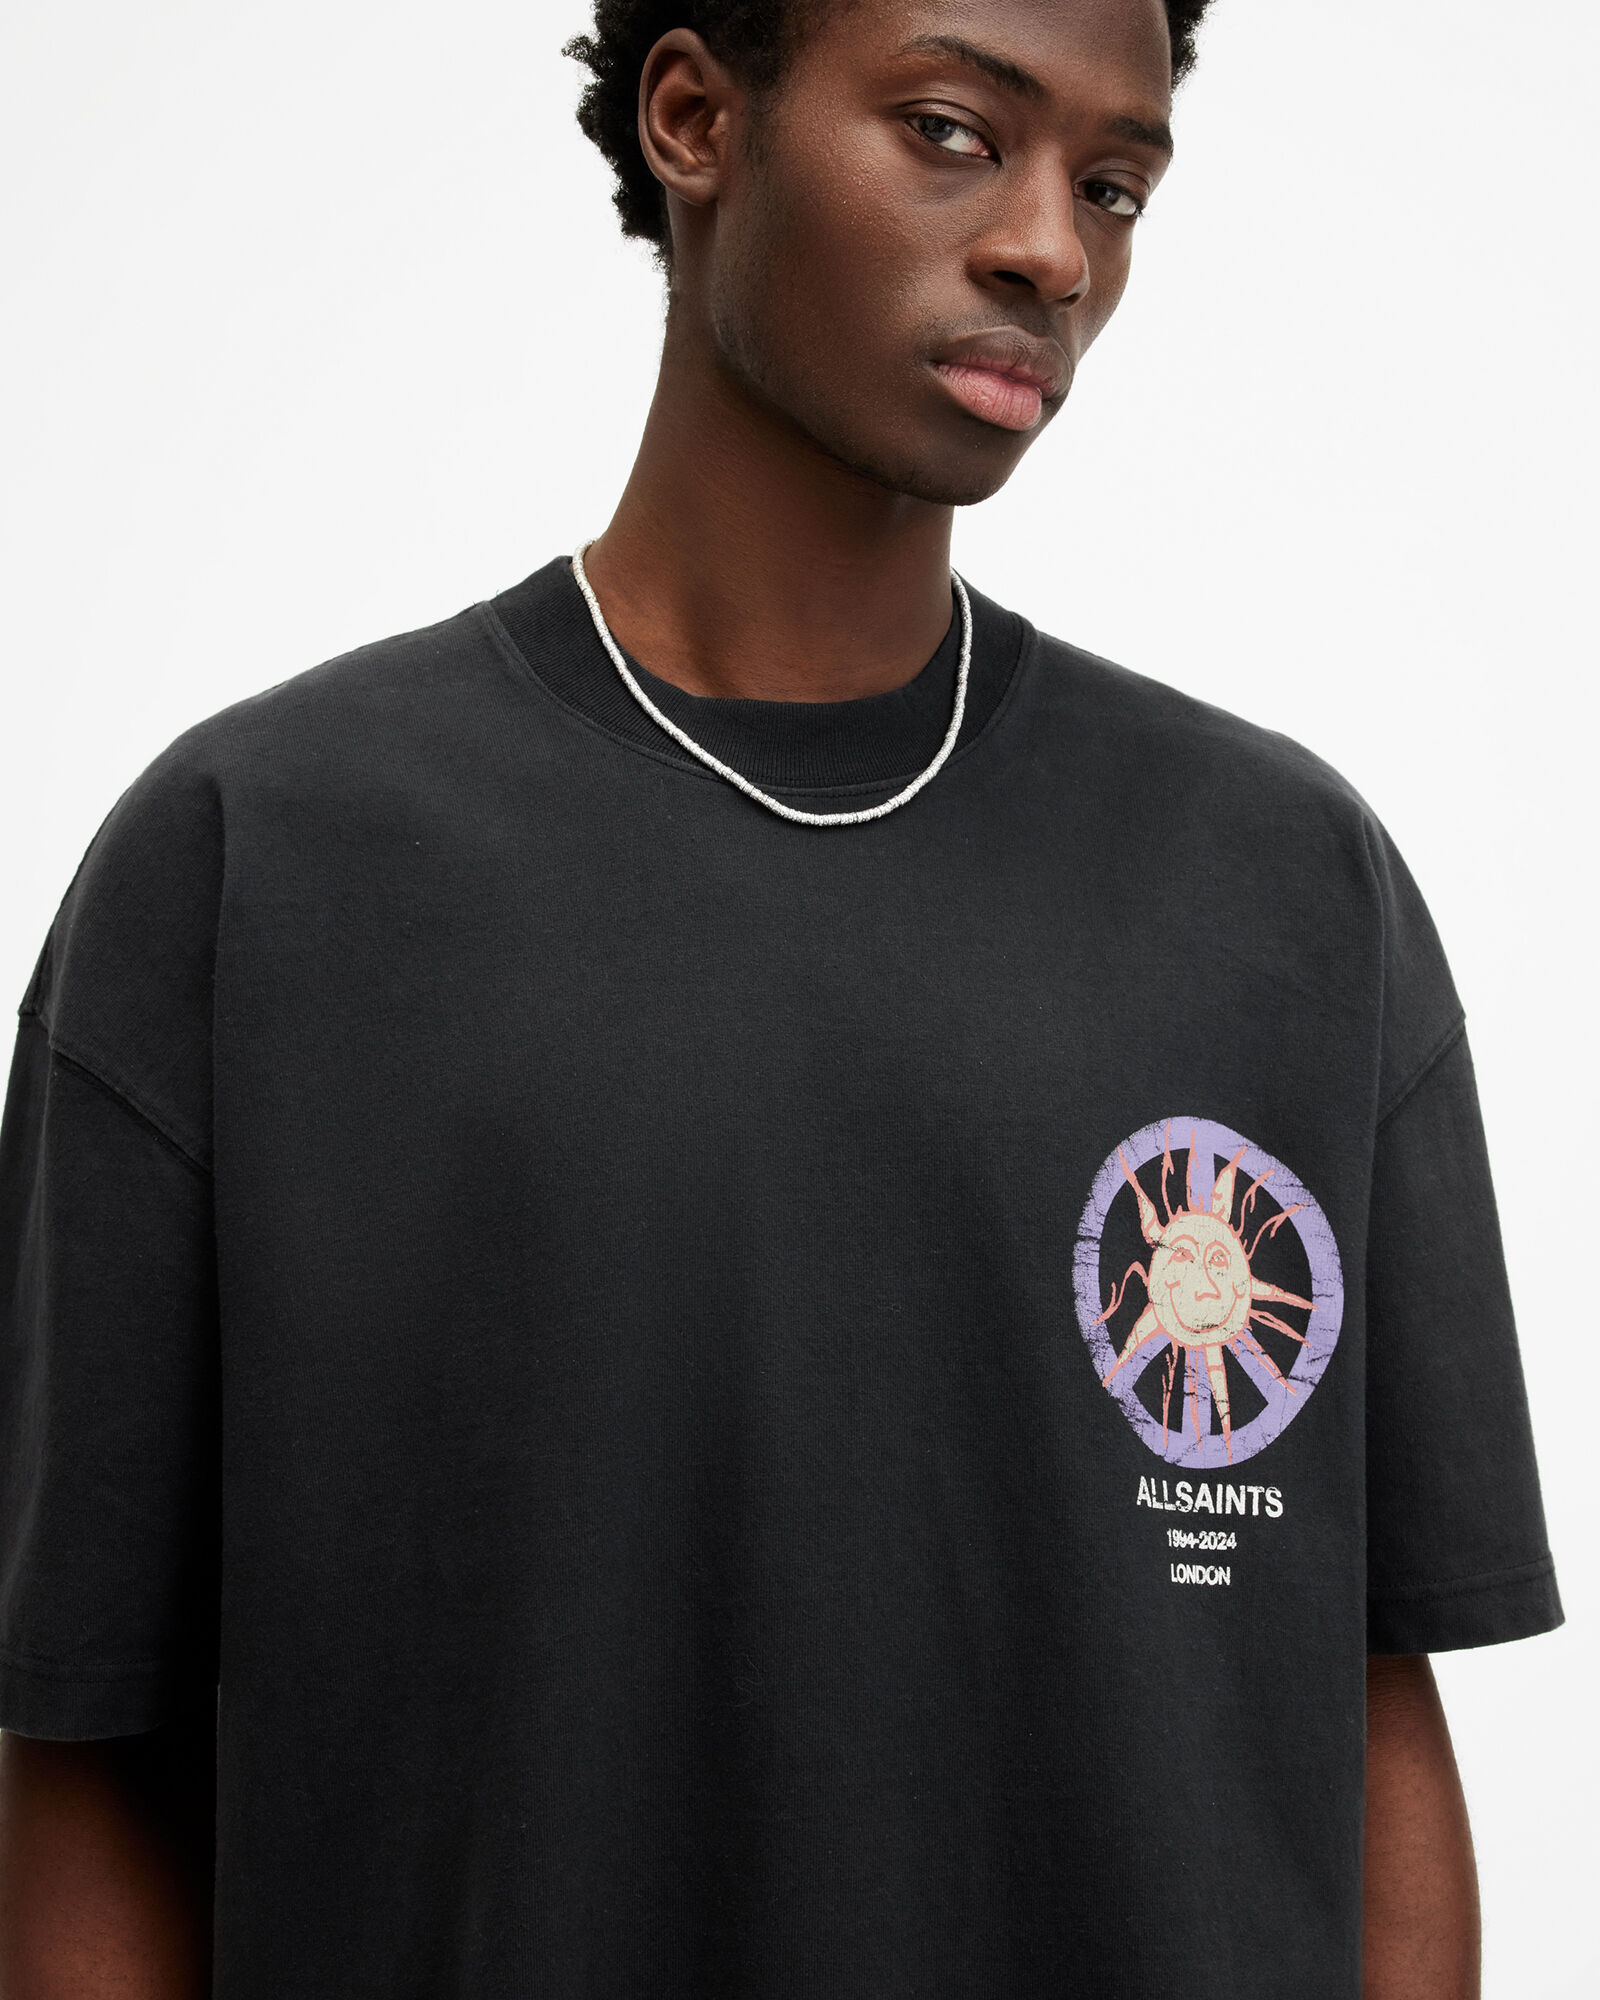 Orbs Oversized Graphic Print T-Shirt